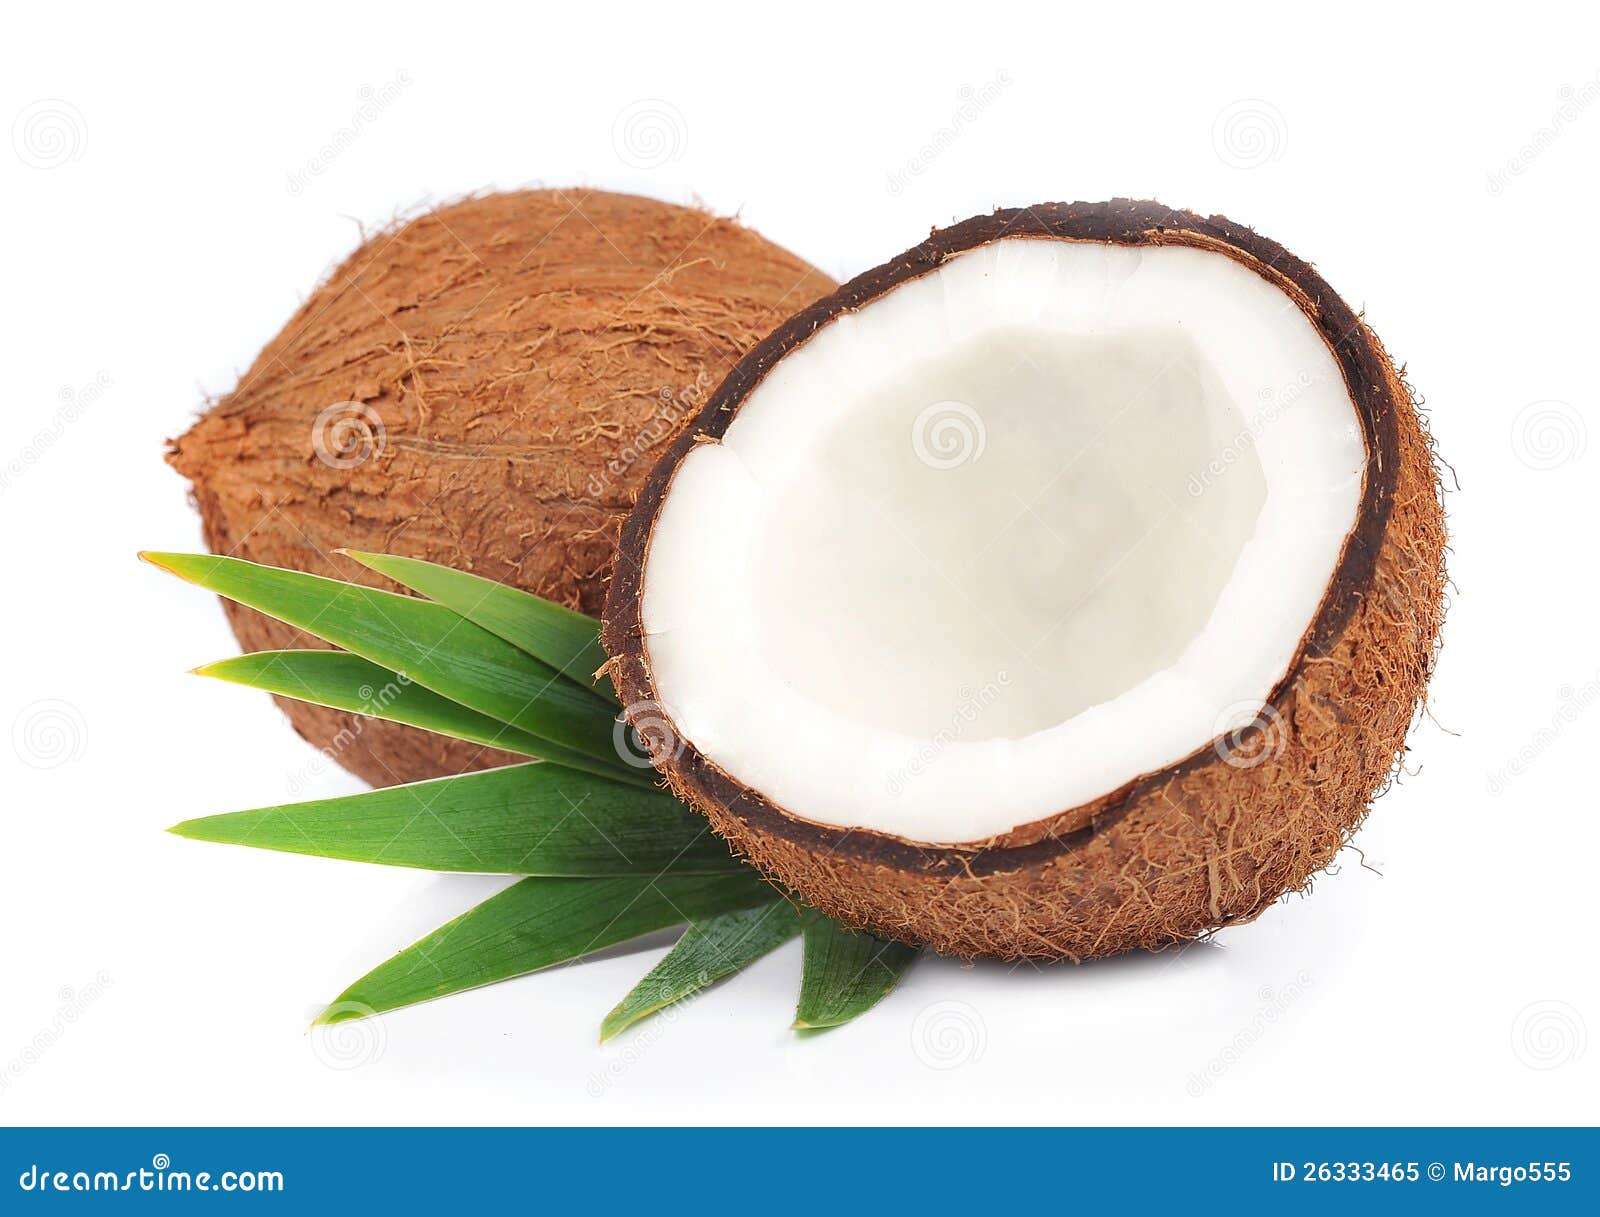 coconut with leaves